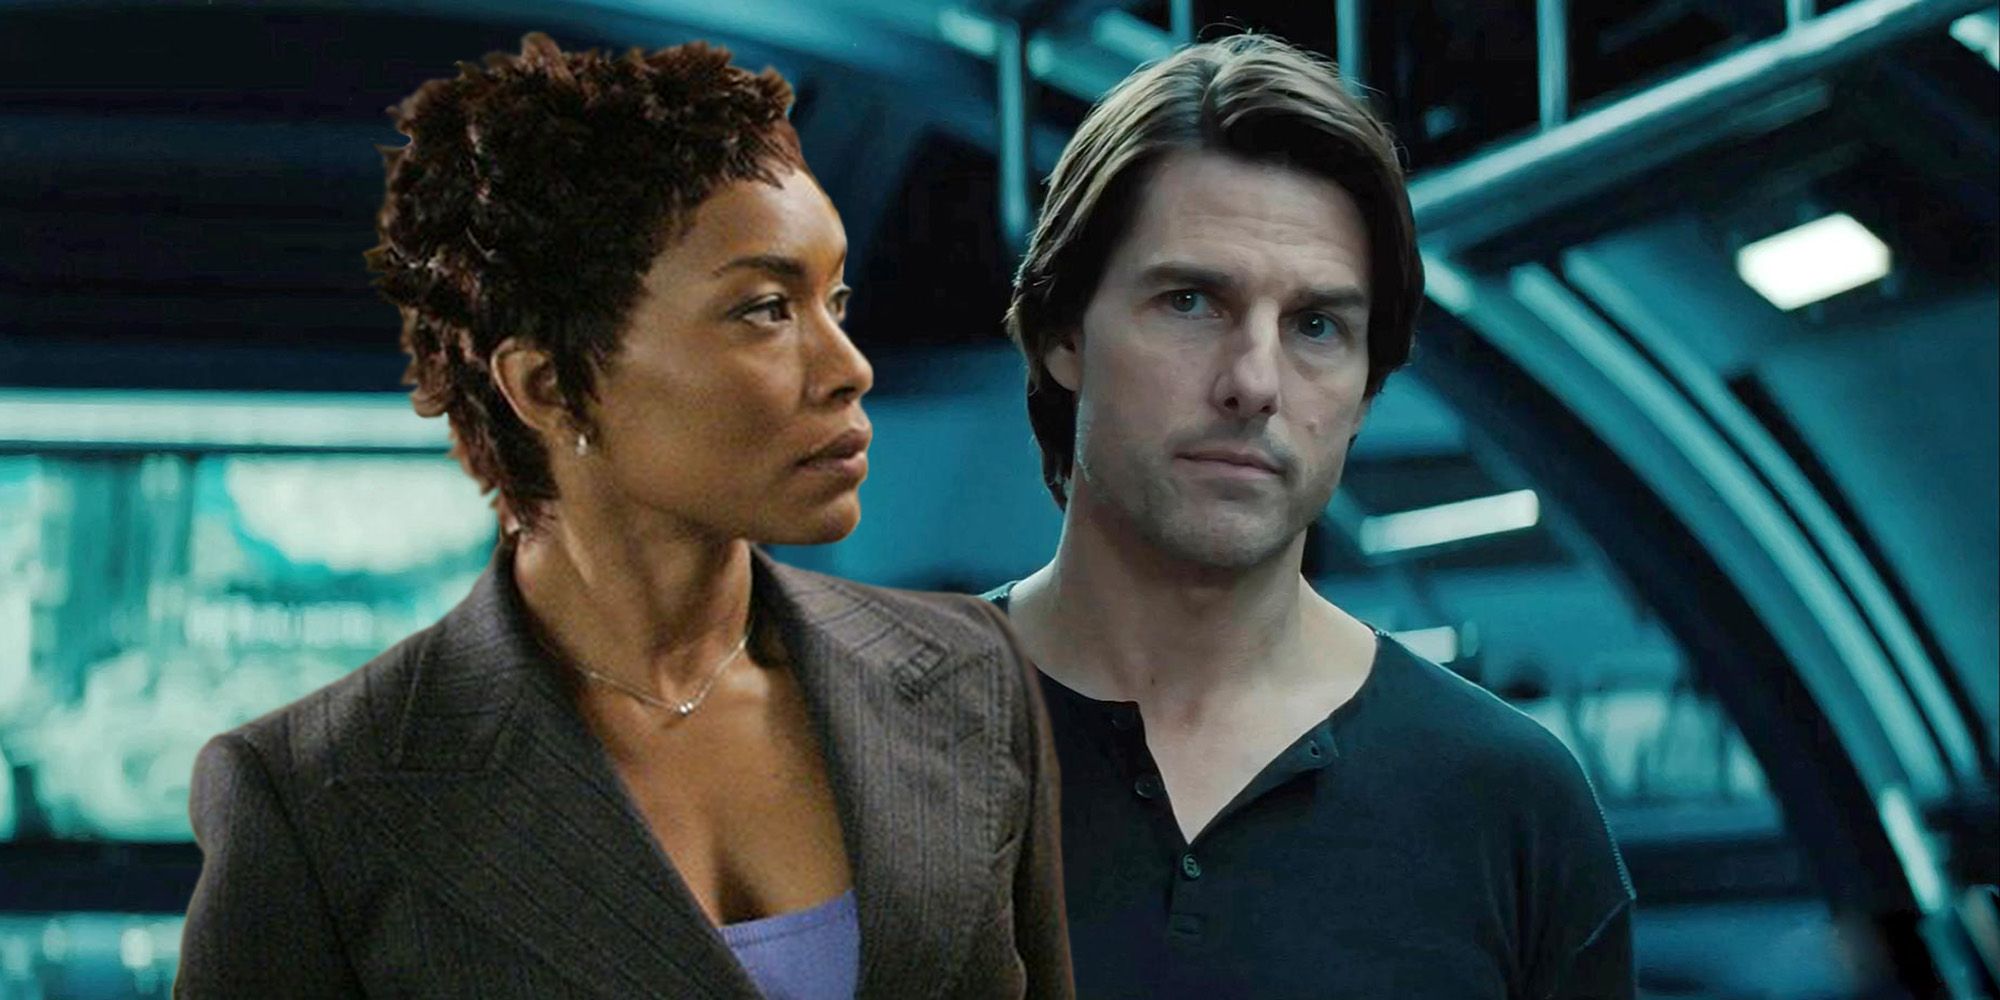 Tom Cruise in Mission: Impossible 4 and Angela Bassett